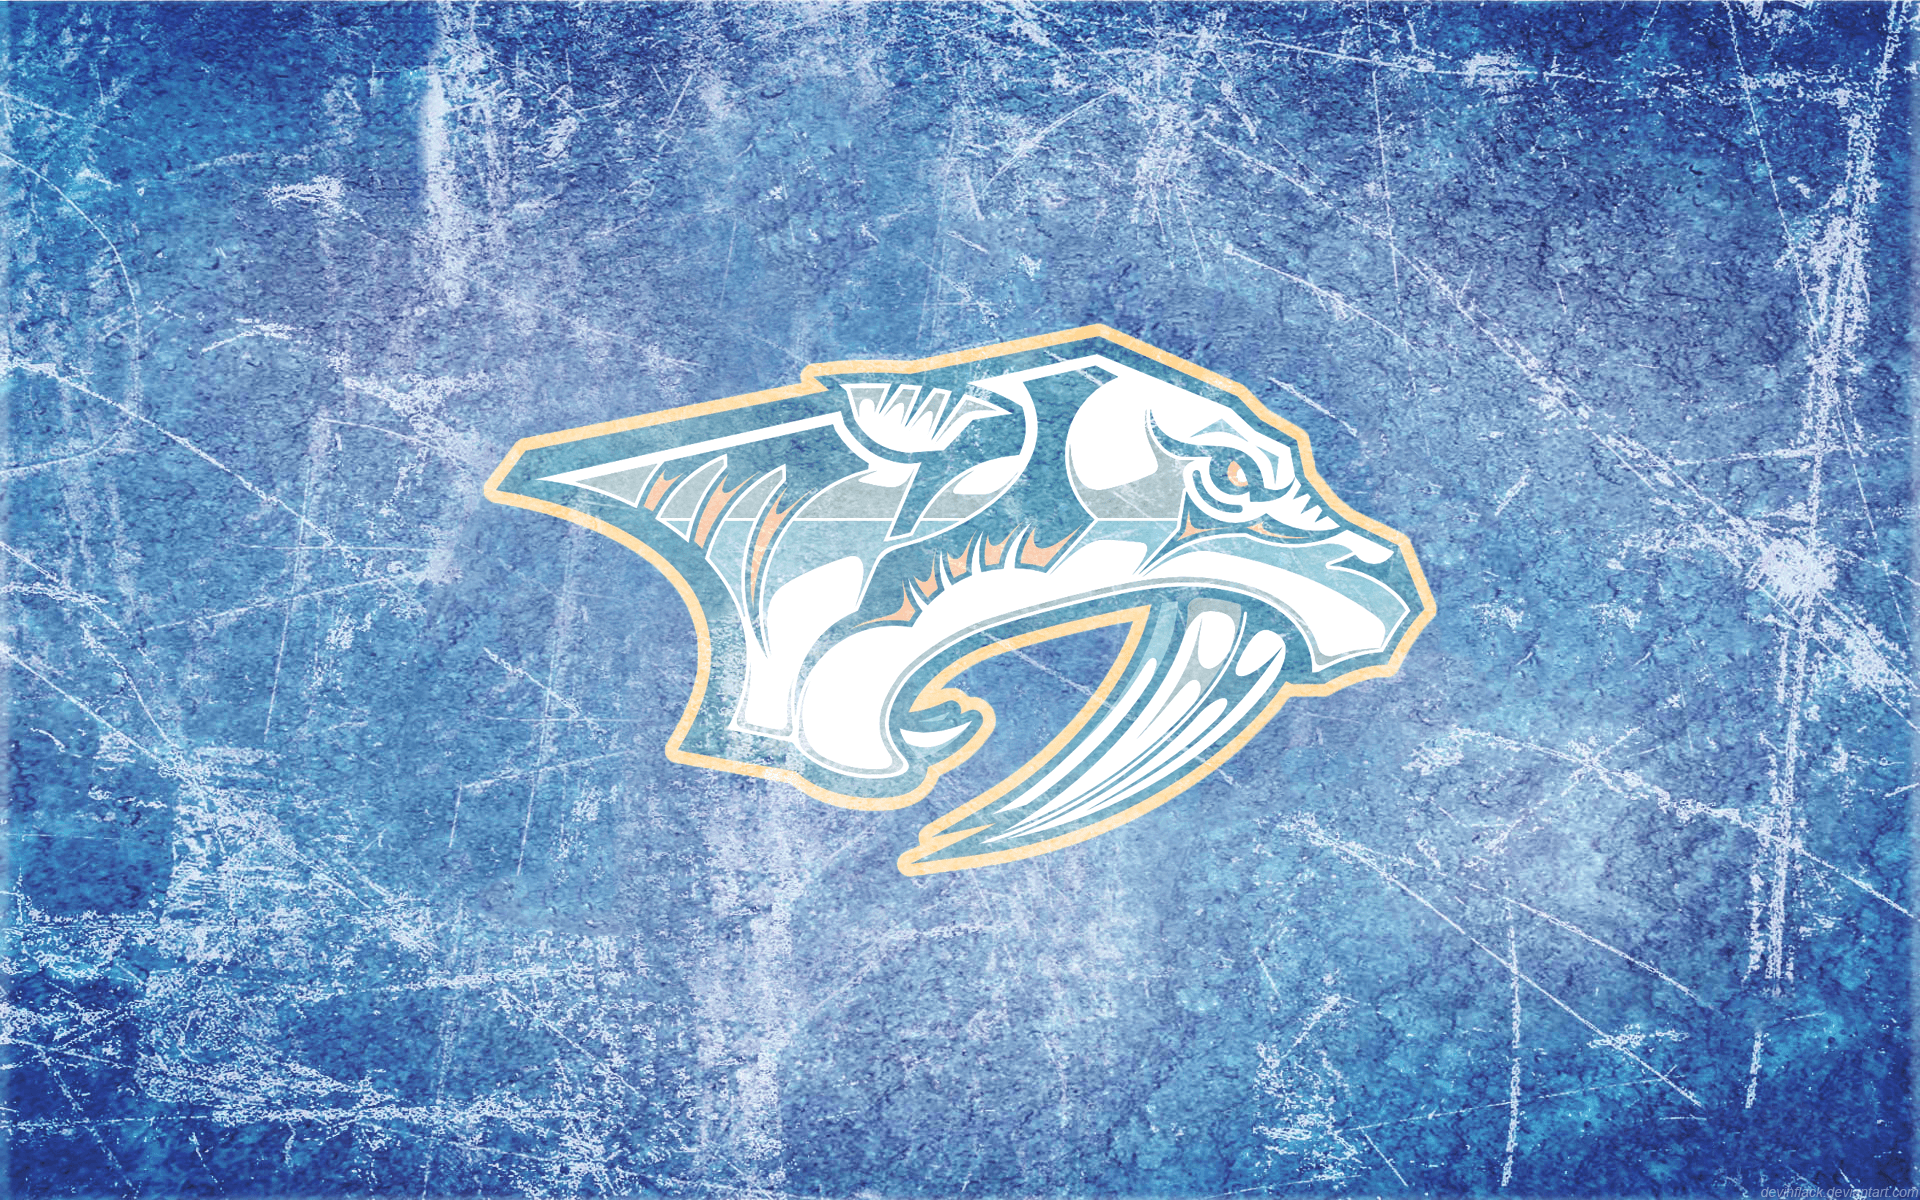 Nashville Predators on X: Here are some wallpapers to remind you